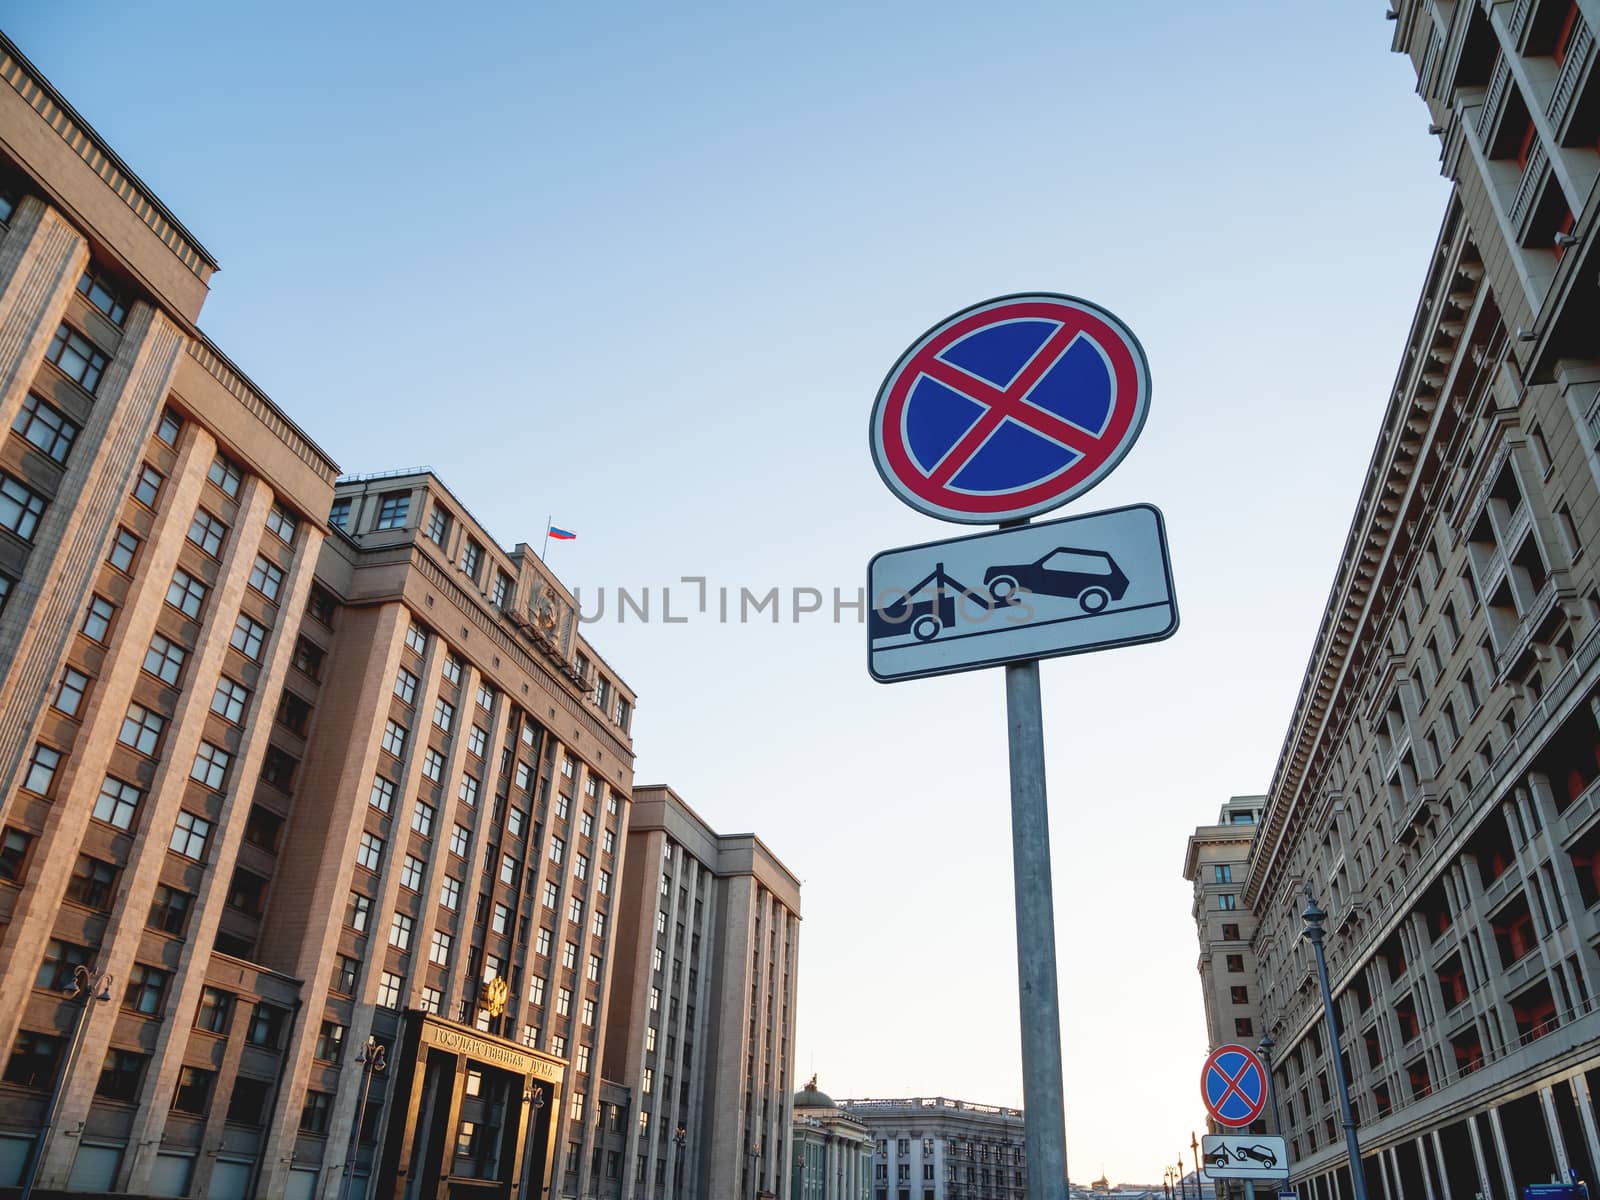 Building of State Duma of Russia inscribed - State Parliament Deserted Okhotny Ryad street. Moscow, Russia. by aksenovko